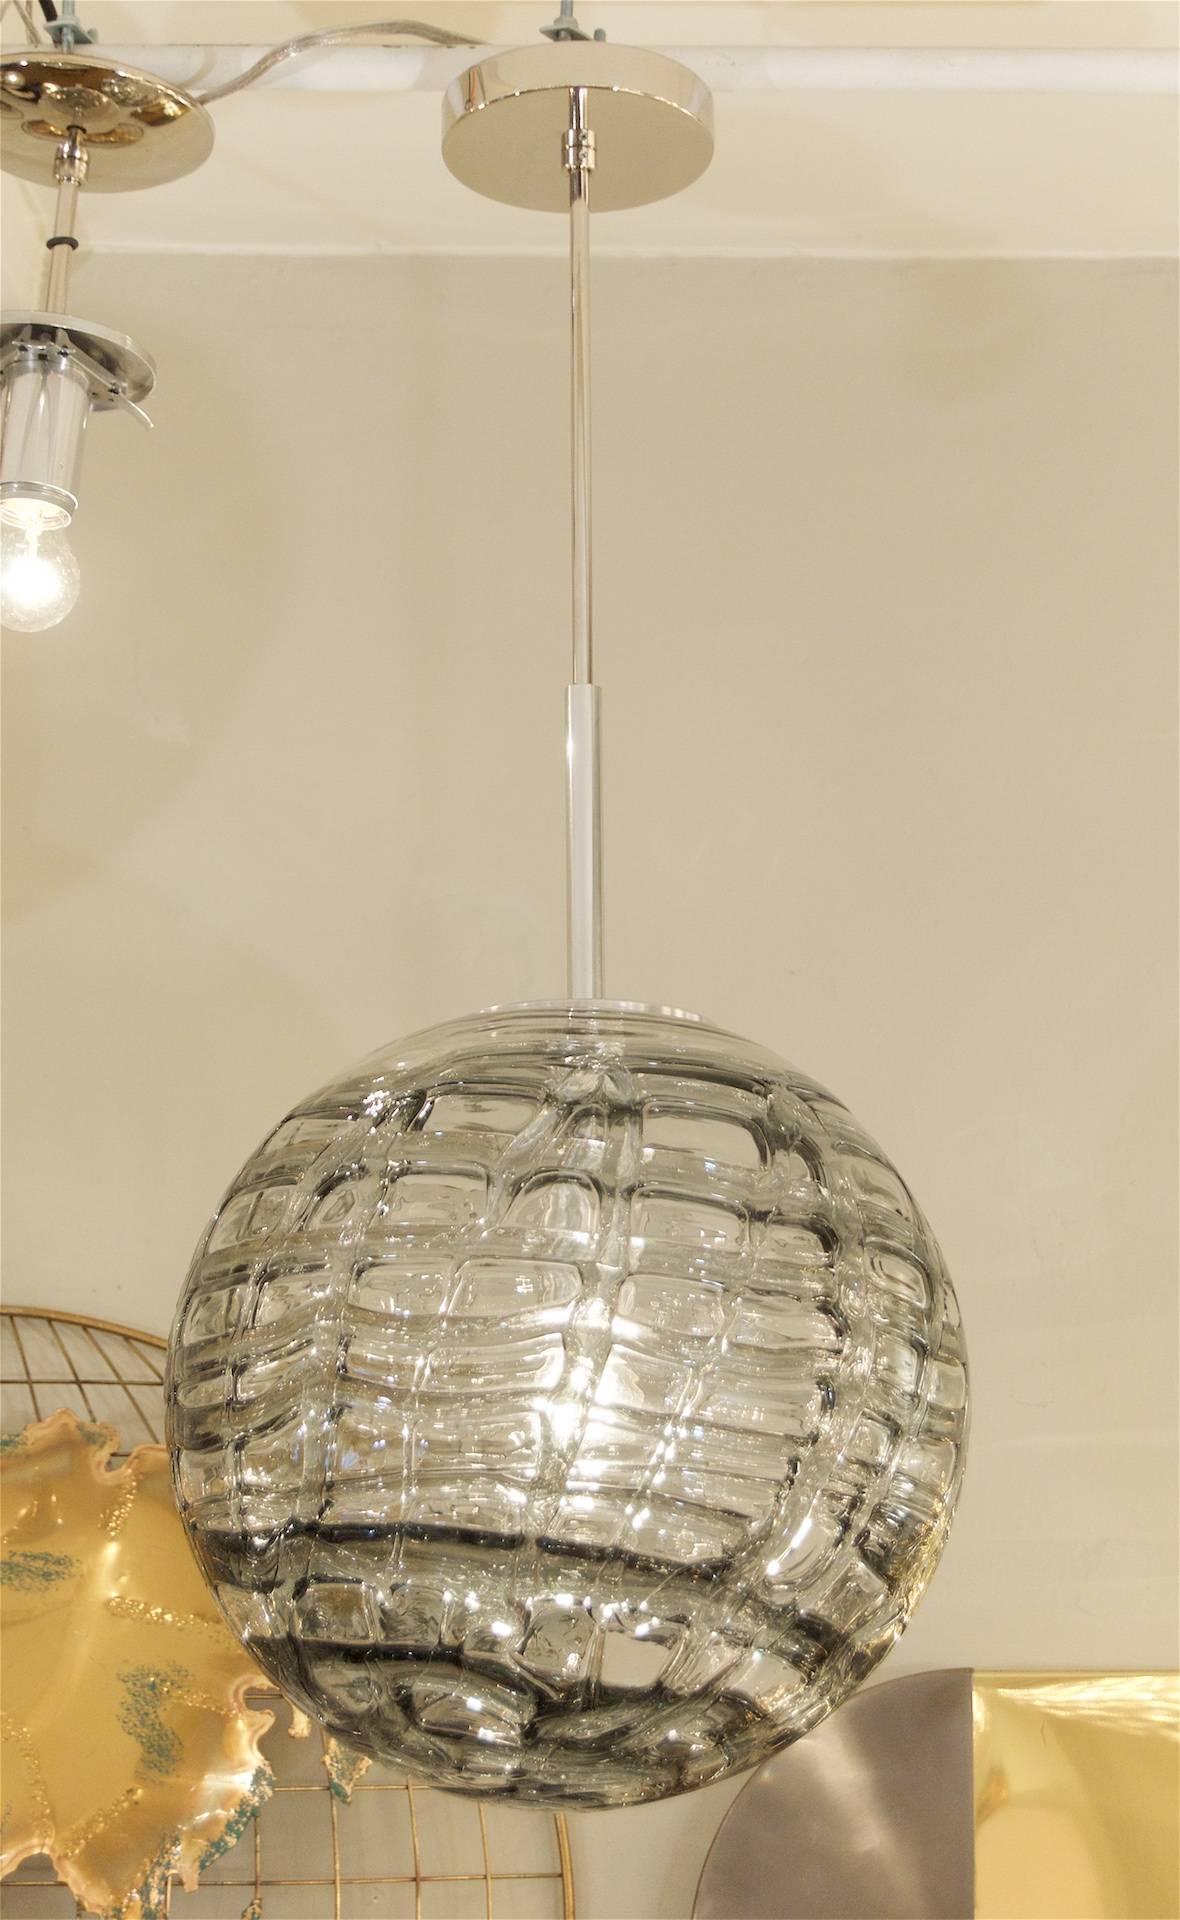 Fantastic Doria pendant will complement all decors. Heavy textured wave surface glass, smoke tones variegated from clear. Chrome hardware. 

Takes a single medium base bulb up to 100 watts, new wiring.

Measure: Length of drop rod can be